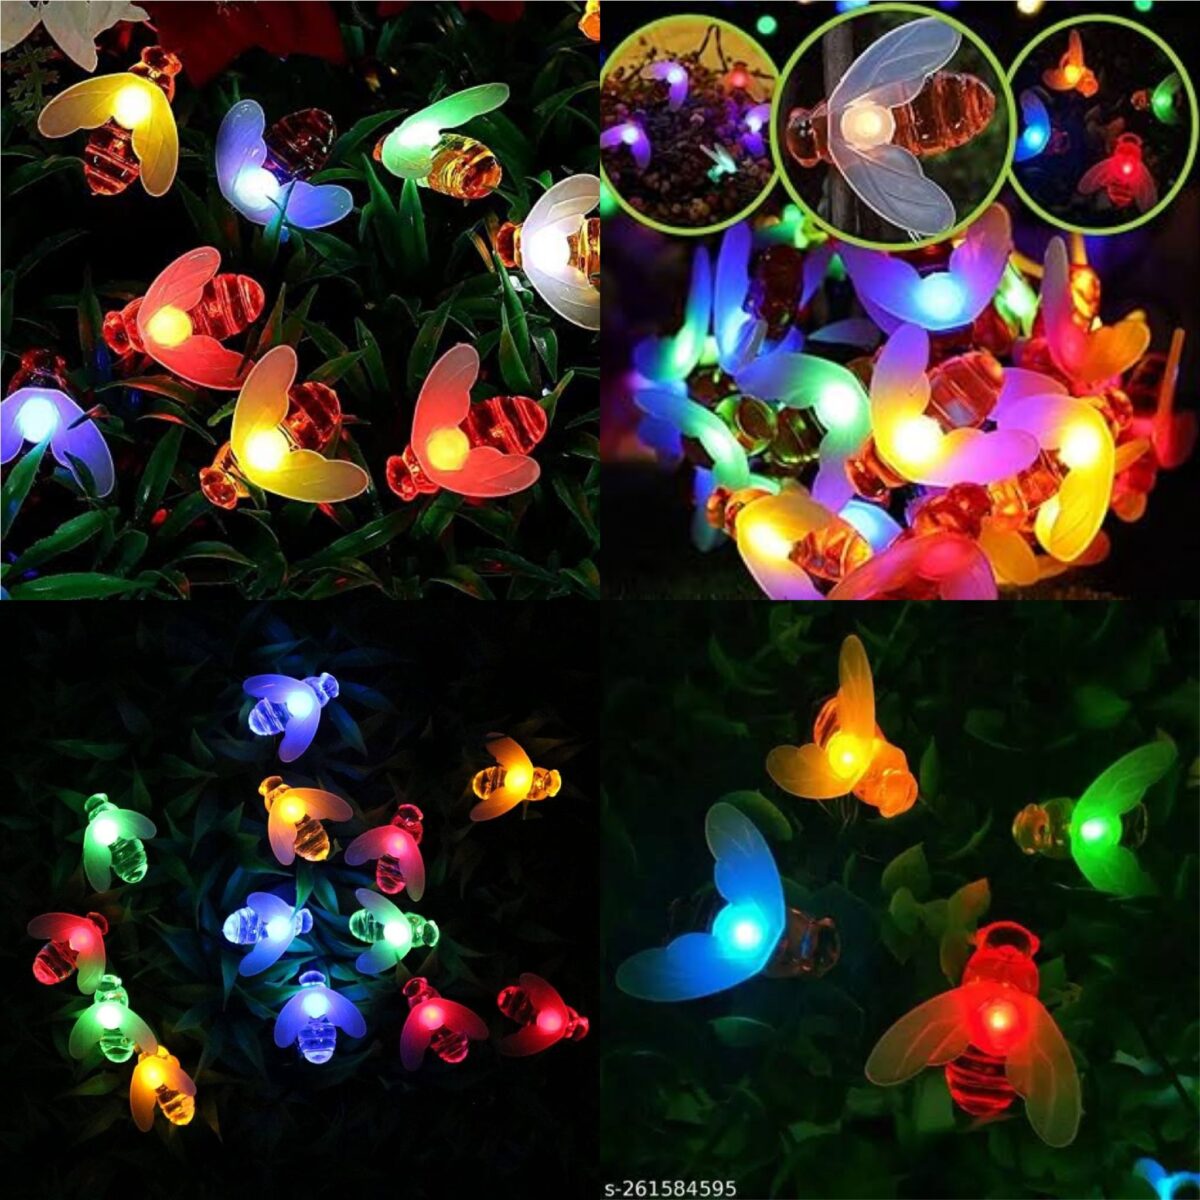 A "Honeybee RGB LED Light" is a decorative lighting fixture that takes the shape of honeybees and offers the ability to emit a range of colors through RGB (Red, Green, Blue) LED technology. These lights are often used for decorative purposes, adding a colorful and whimsical touch to indoor and outdoor spaces. They can be controlled to display various hues, making them versatile for creating different lighting effects.